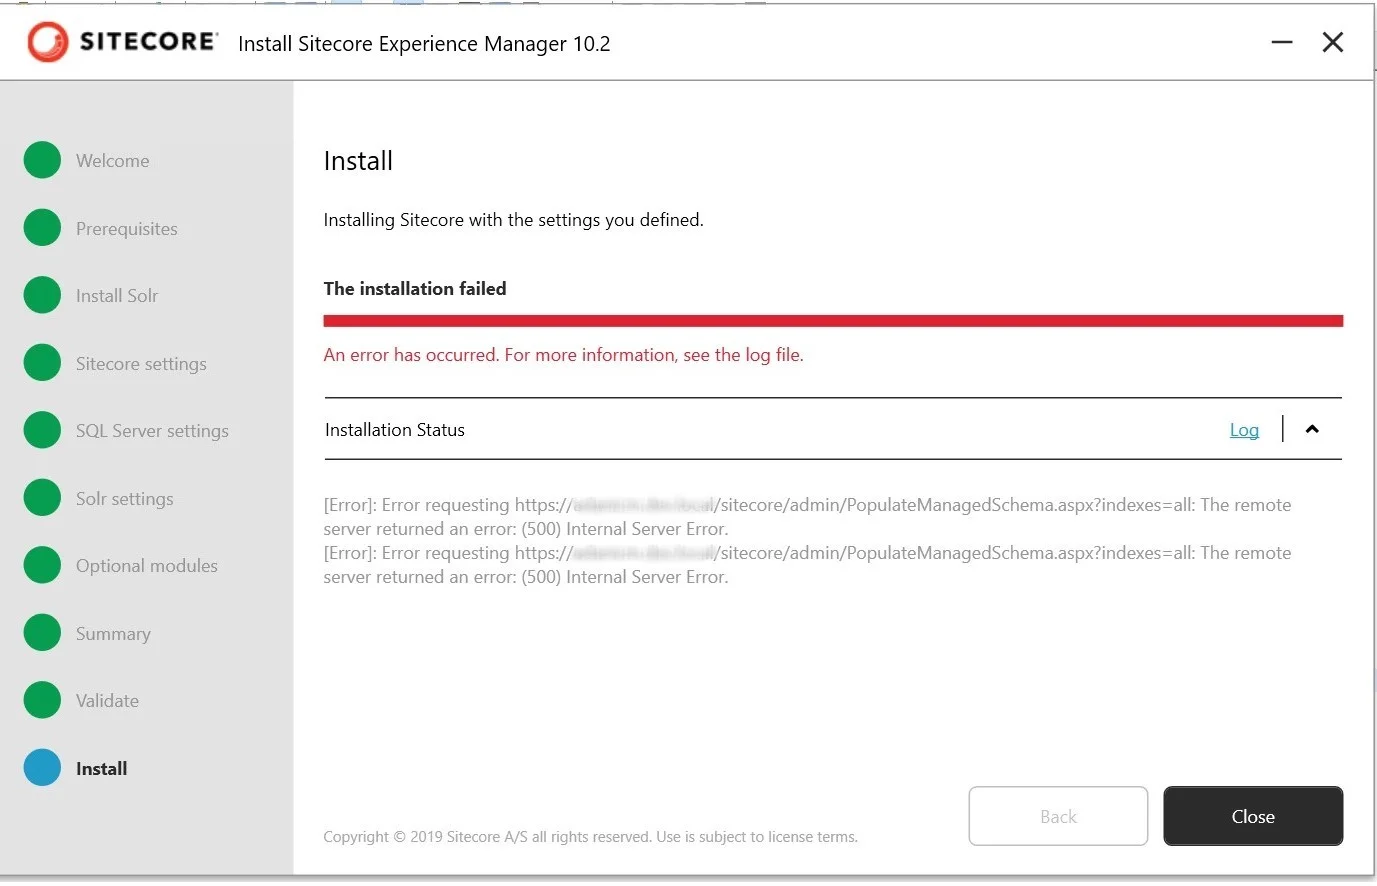 how-to-resolve-the-installation-issue-in-sitecore-xp-xm-10-2-1